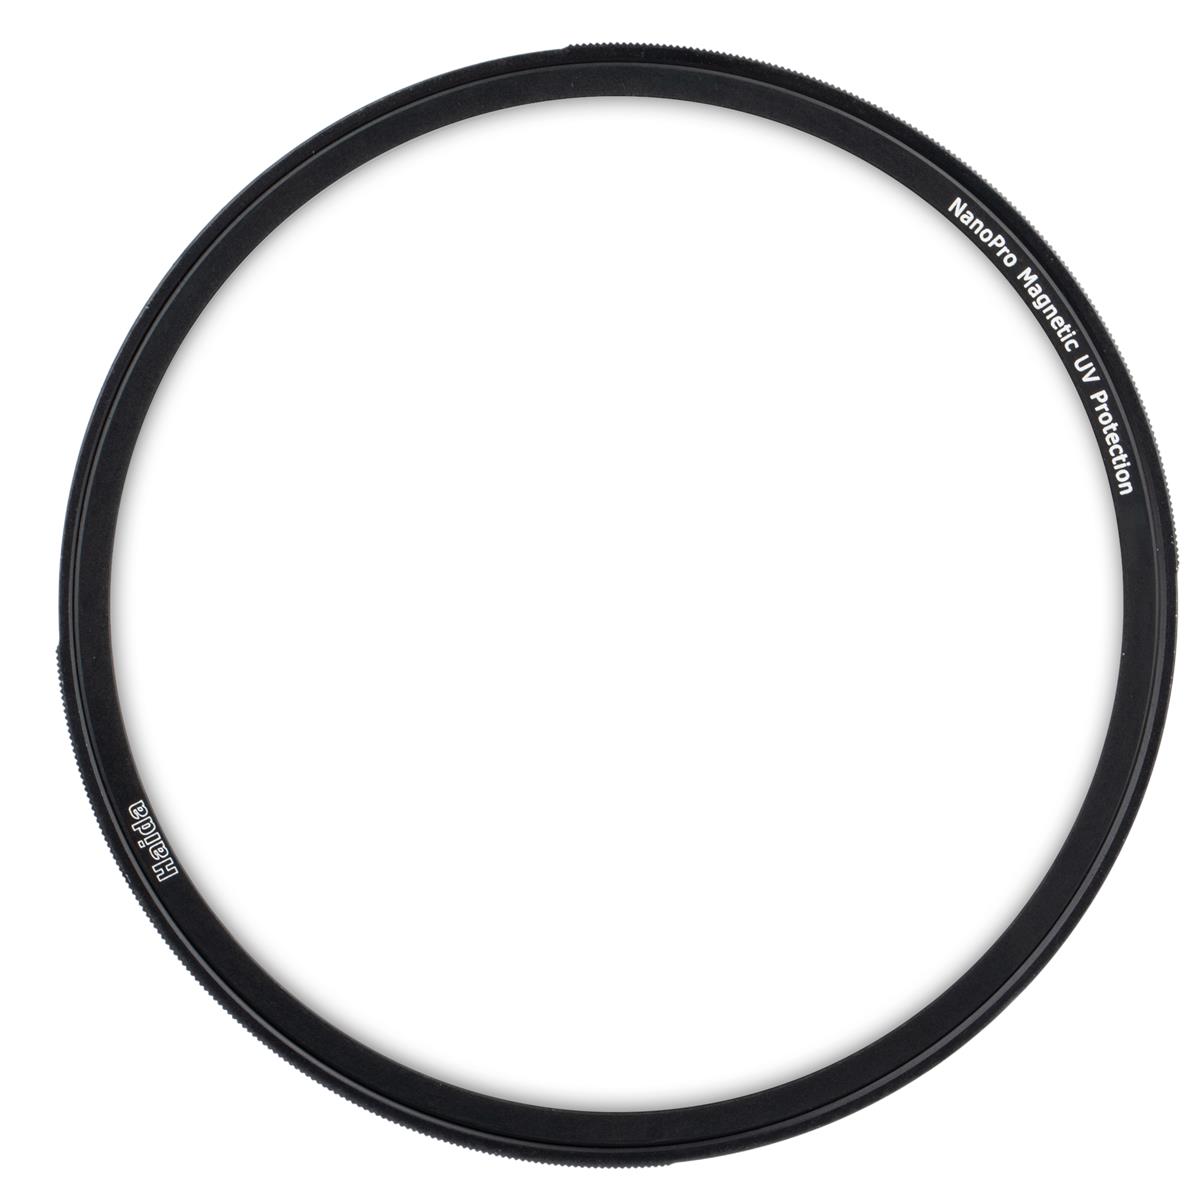 kase 77mm 82mm magnetic adapter ring convert thread filter to magnetic filter Haida 55mm Haida NanoPro Magnetic UV Protection Filter with Adapter Ring